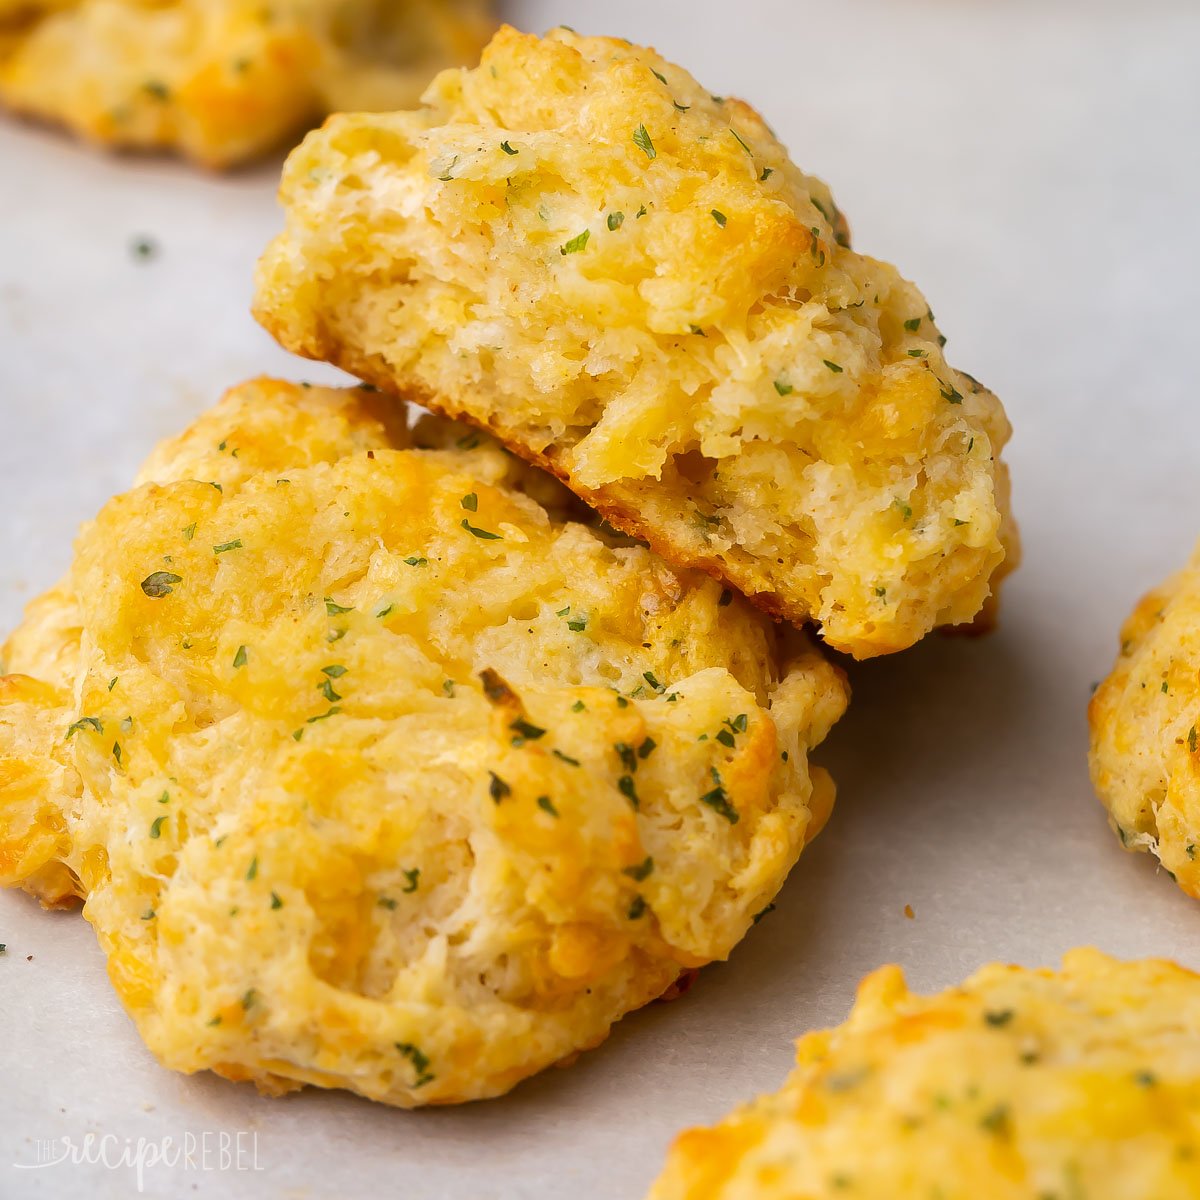 https://www.thereciperebel.com/wp-content/uploads/2023/04/cheddar-bay-biscuits-TRR-1200-27-of-41.jpg